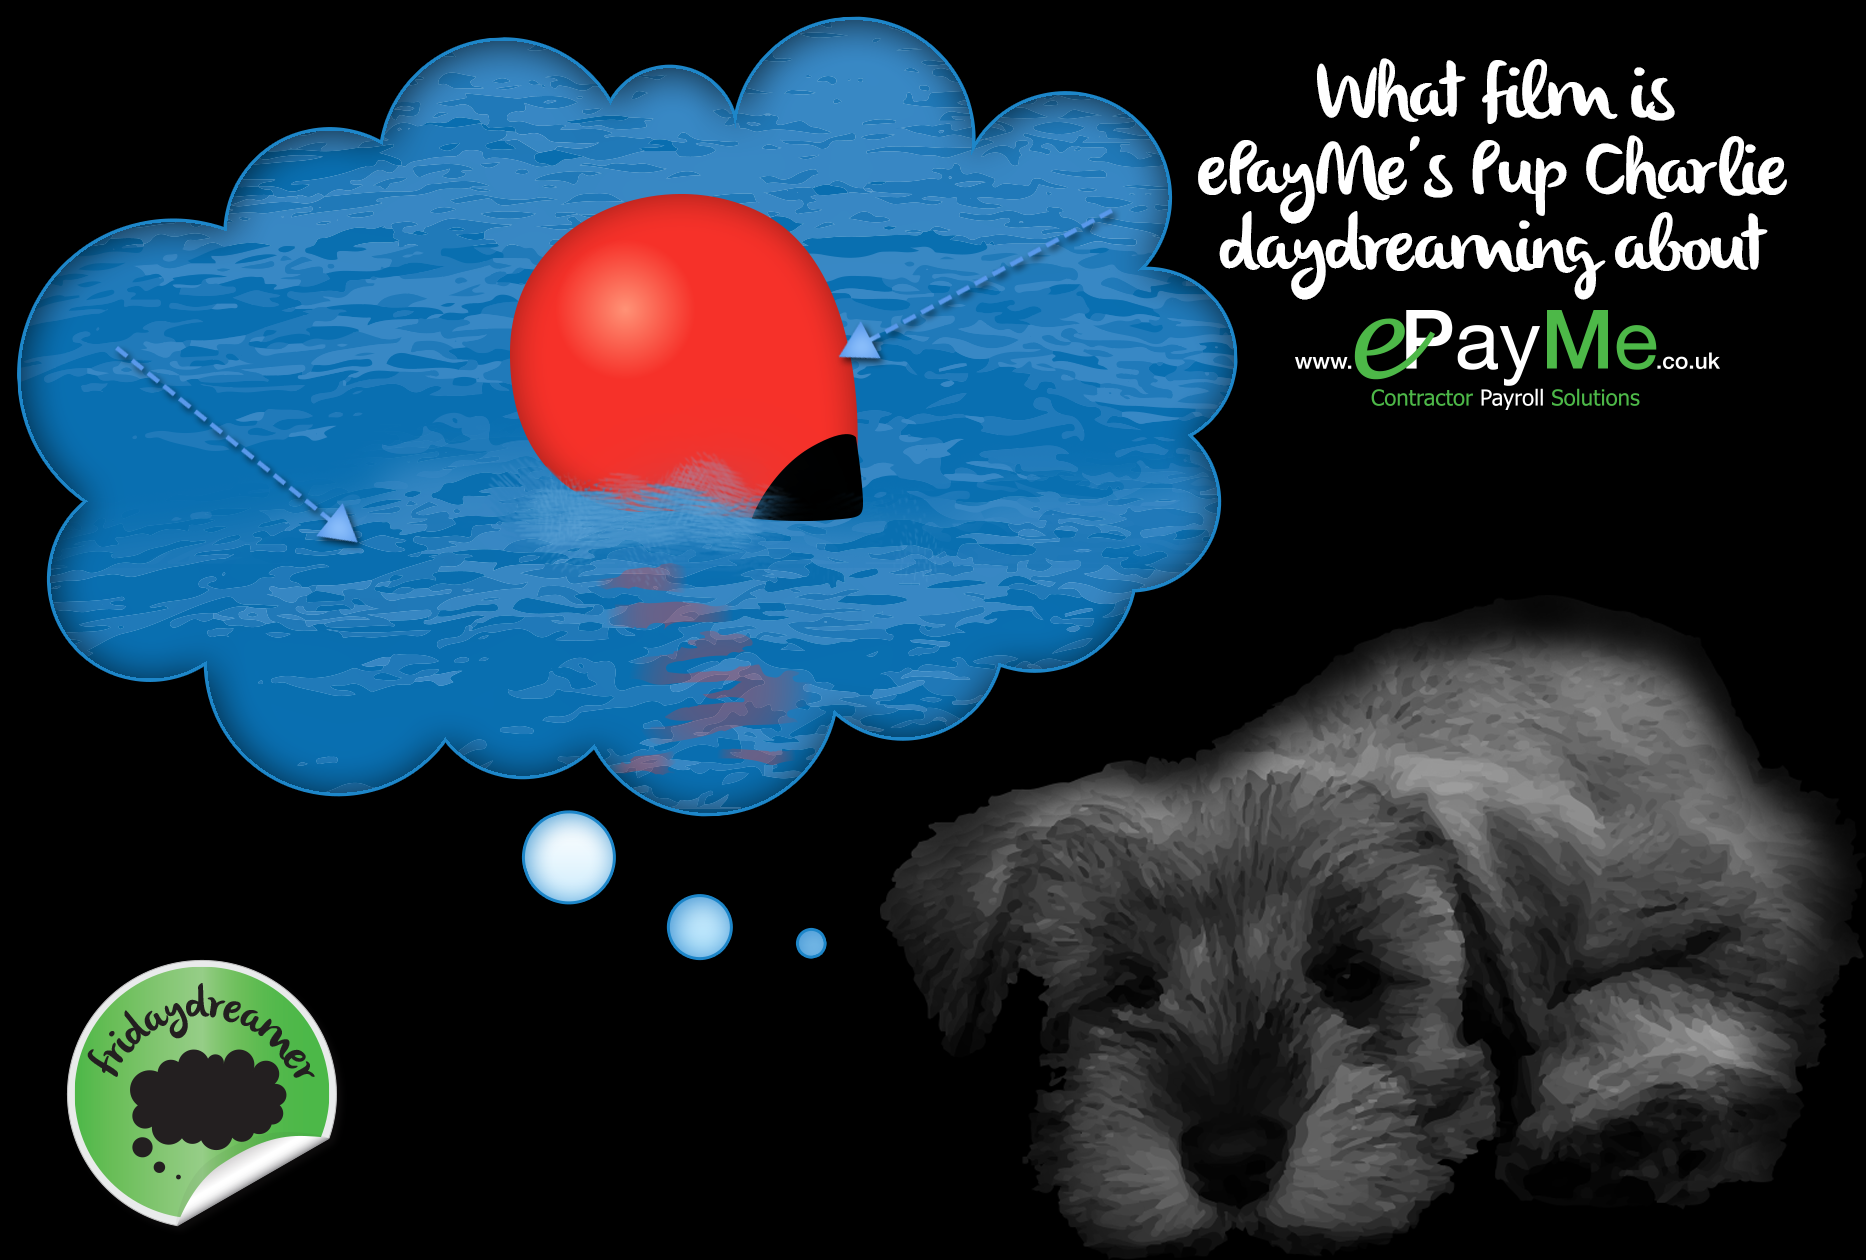 Fridaydreamer - can you guess the film that ePayMe's puppy is daydreaming about